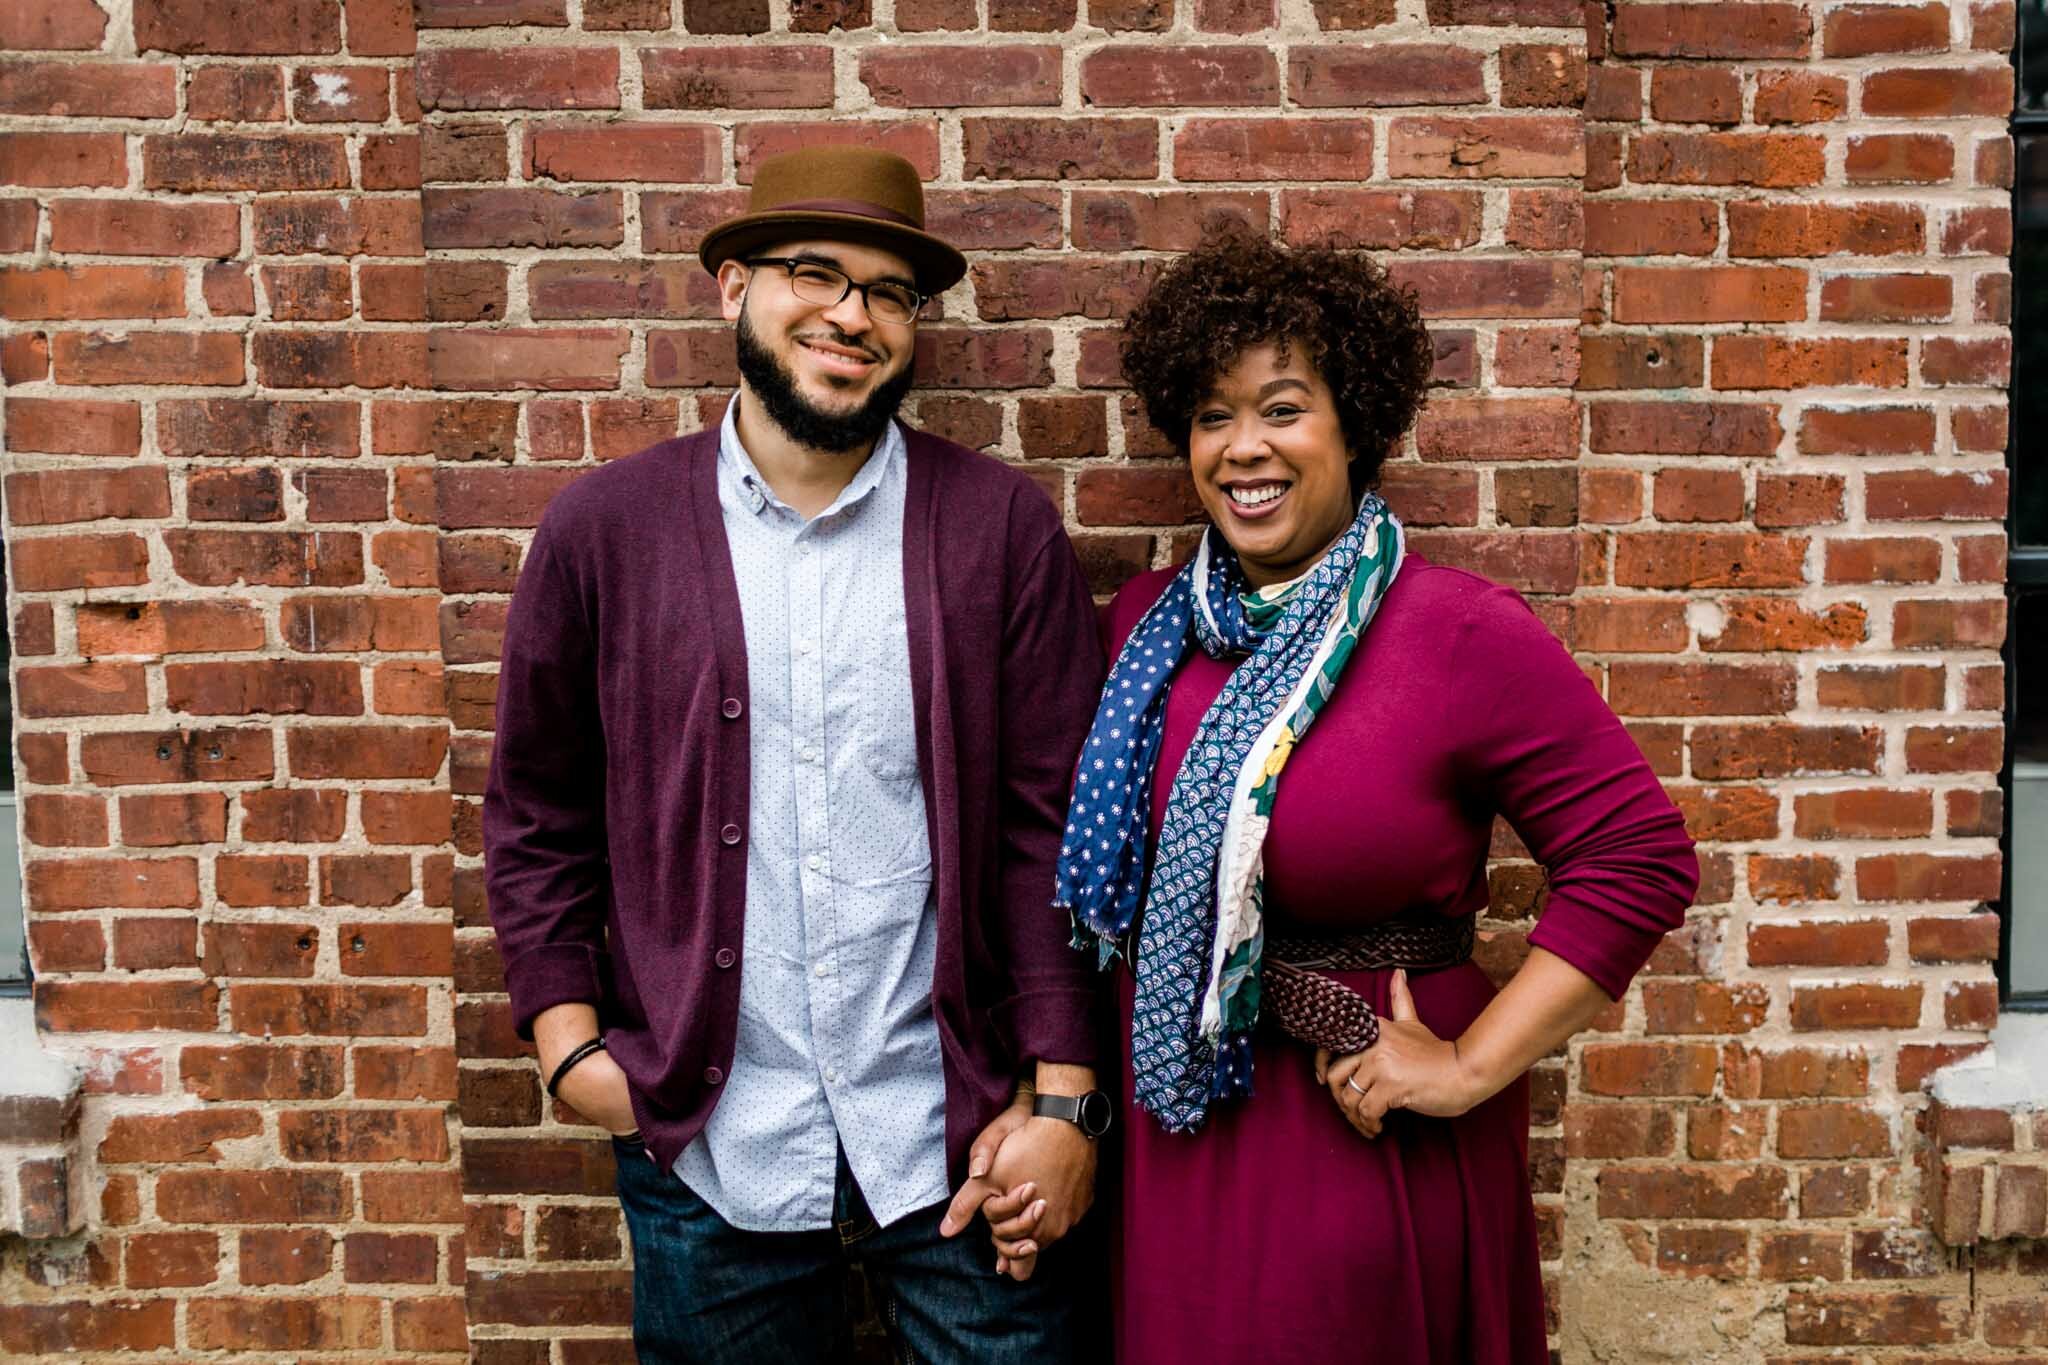 Durham Photographer | By G. Lin Photography | Couple standing and smiling against brick wall